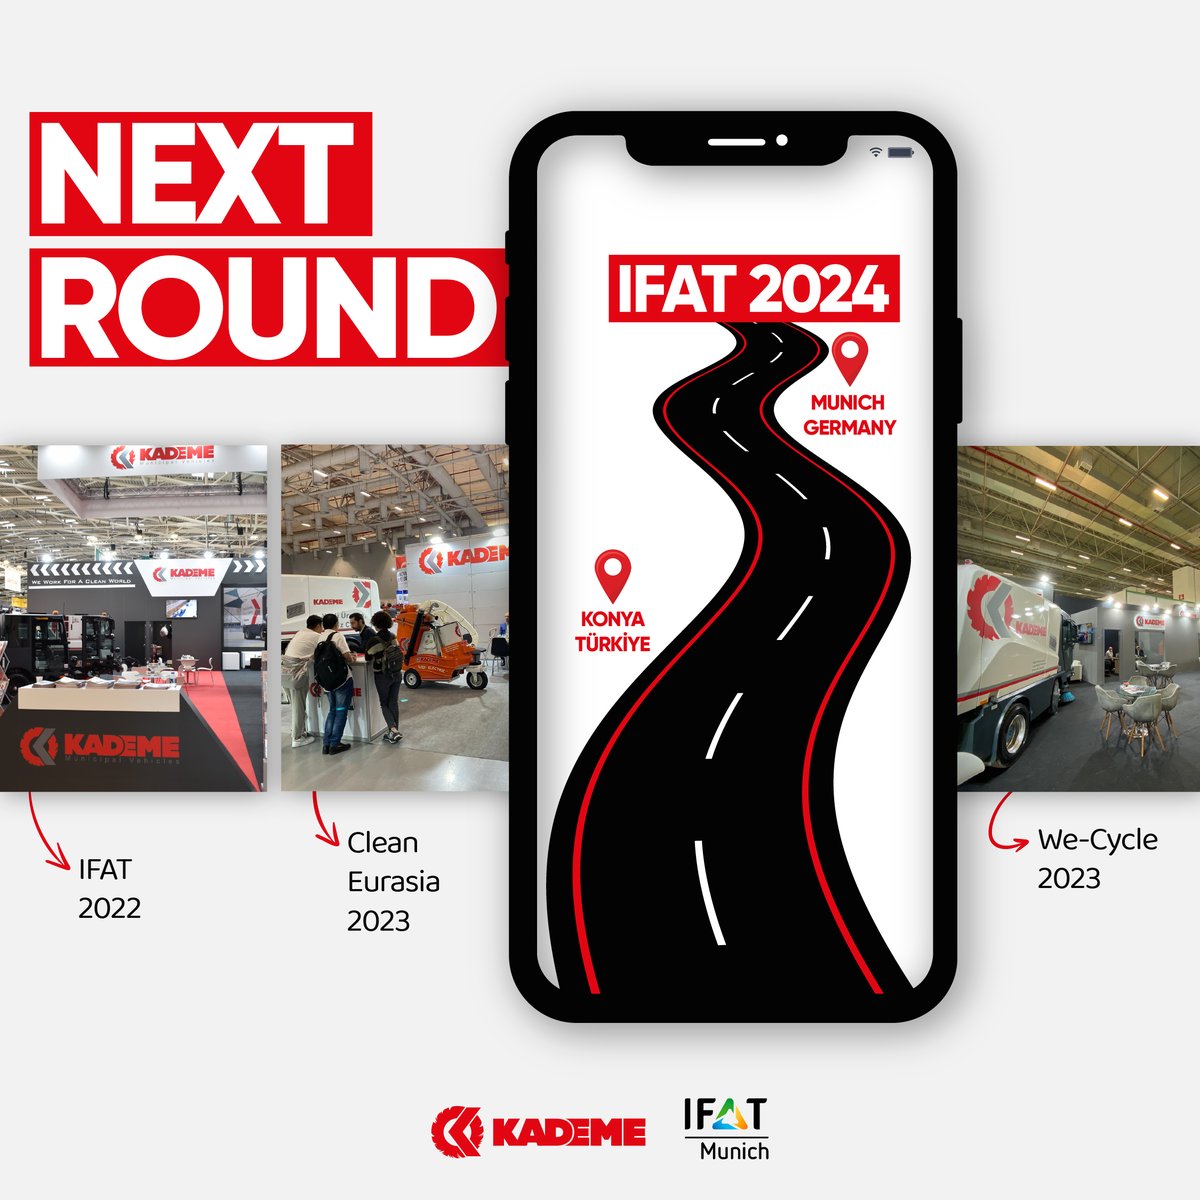 IFAT Munich is the next fair we will attend. Visit us to get detailed information about our road sweepers in different segments. Visit us.‌ Hall C5, Stant 105/204 #Kademe #IFAT2024 #Munich